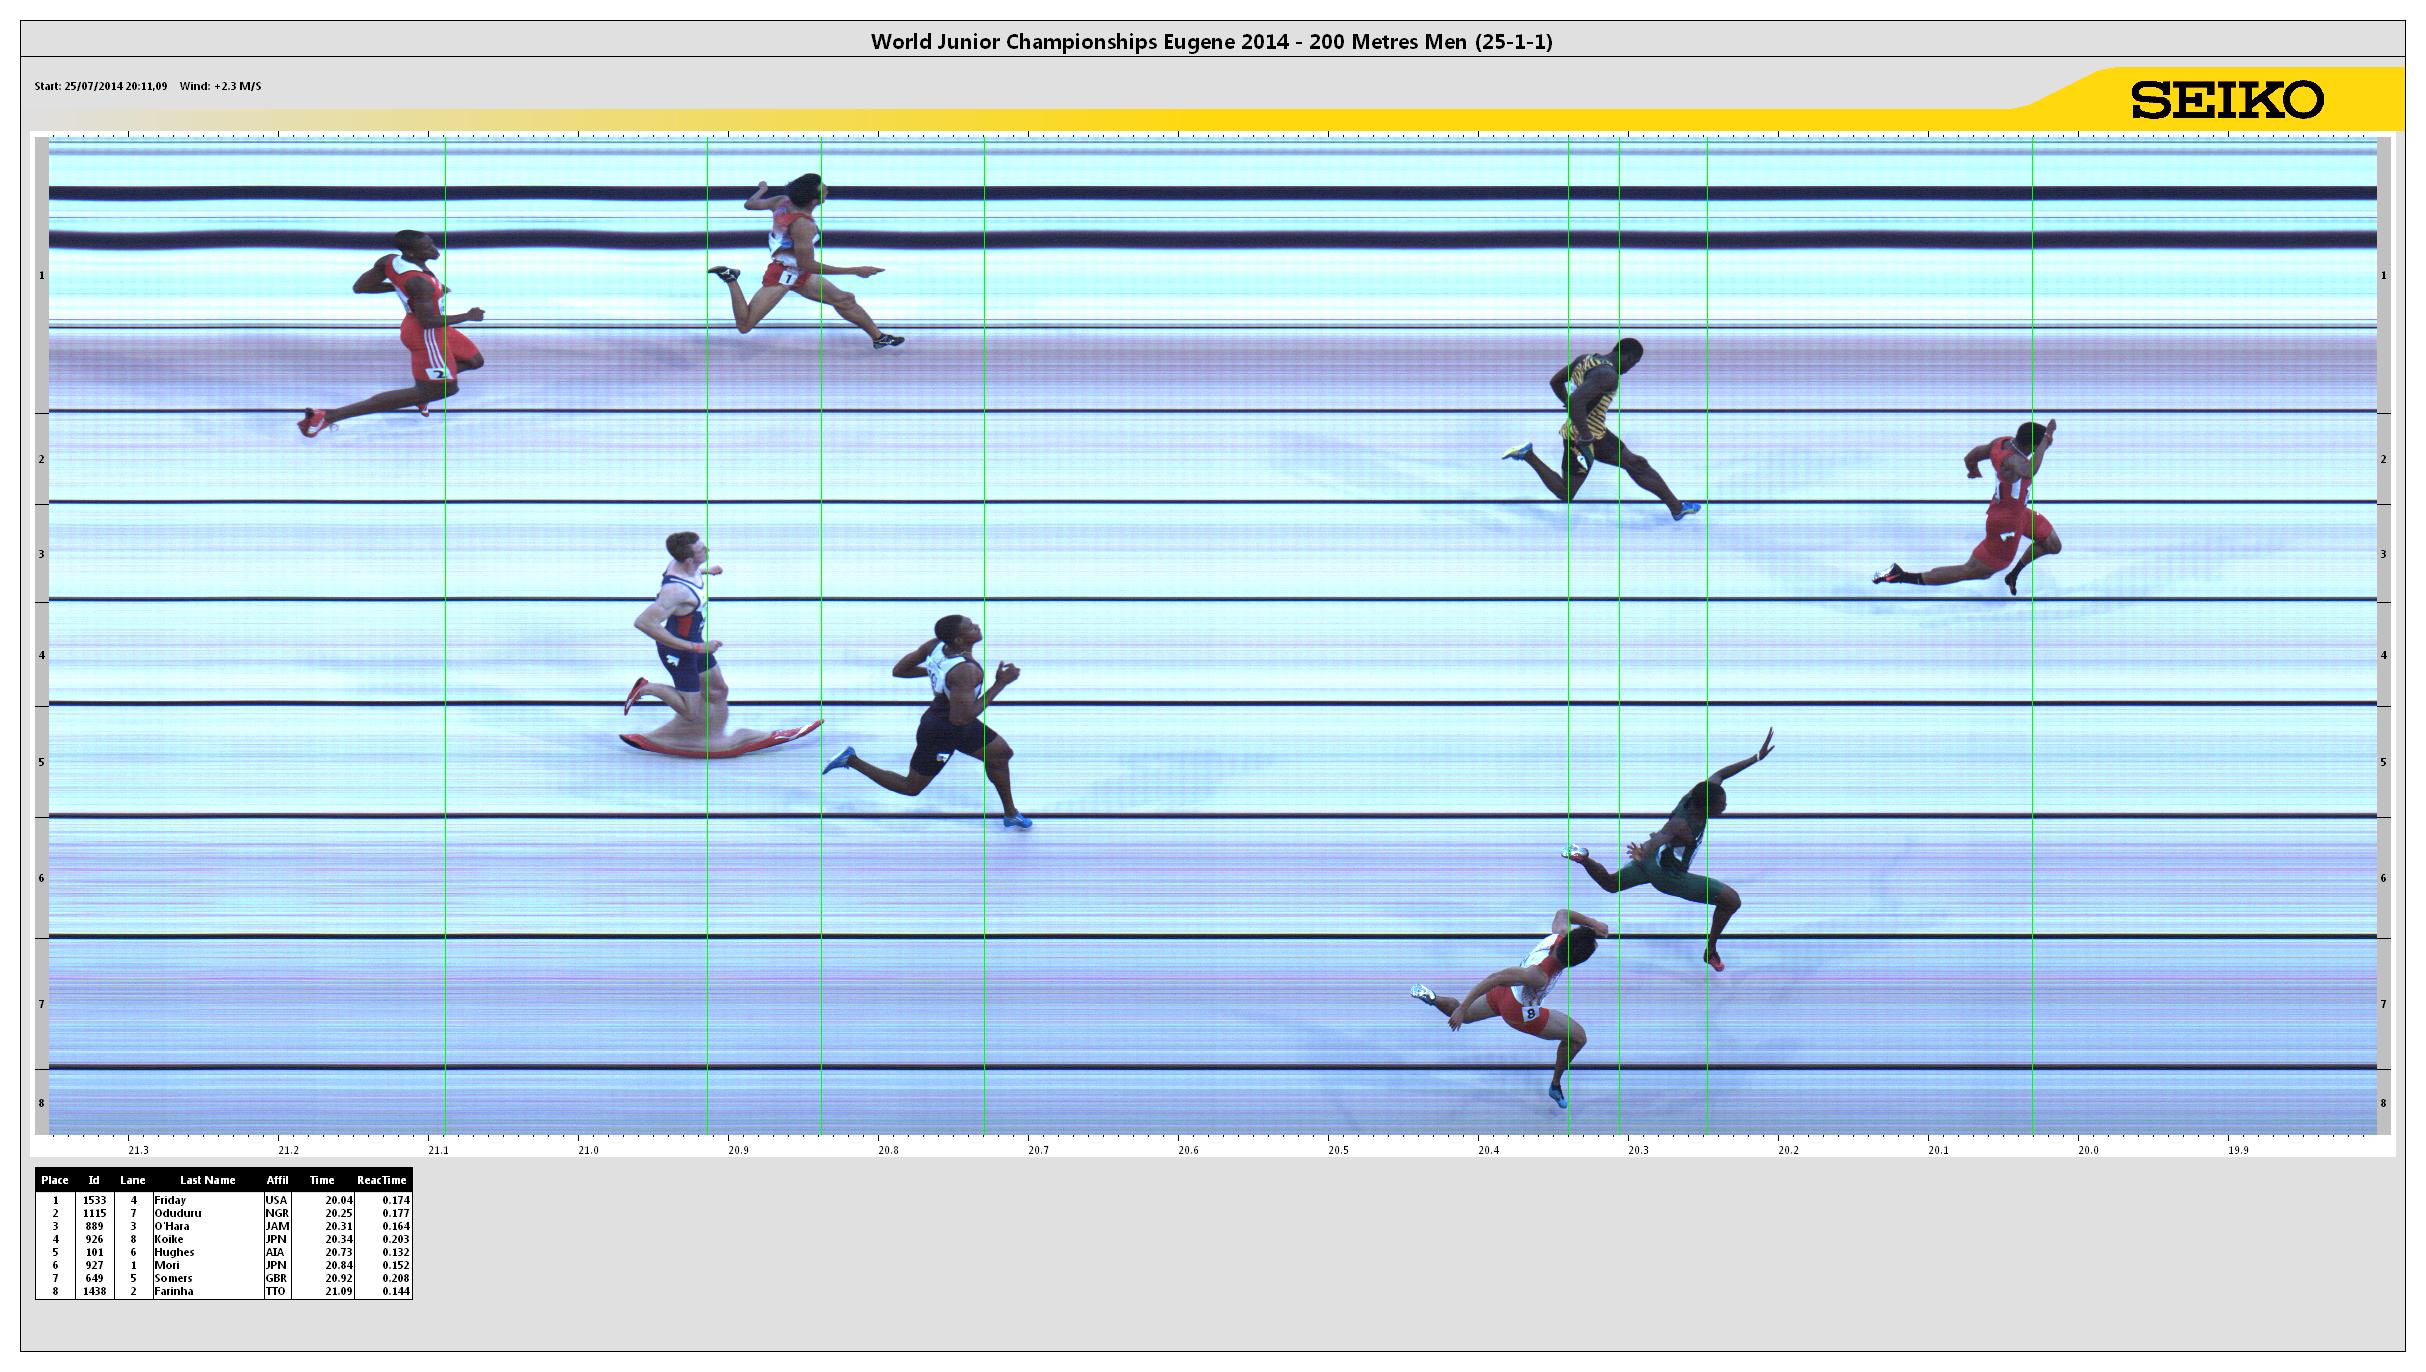 Photo finish of Divine Oduduru's 2nd place finish in the 200m at the 2014 World Juniors,  in a wind-assisted time of 20.25 seconds!